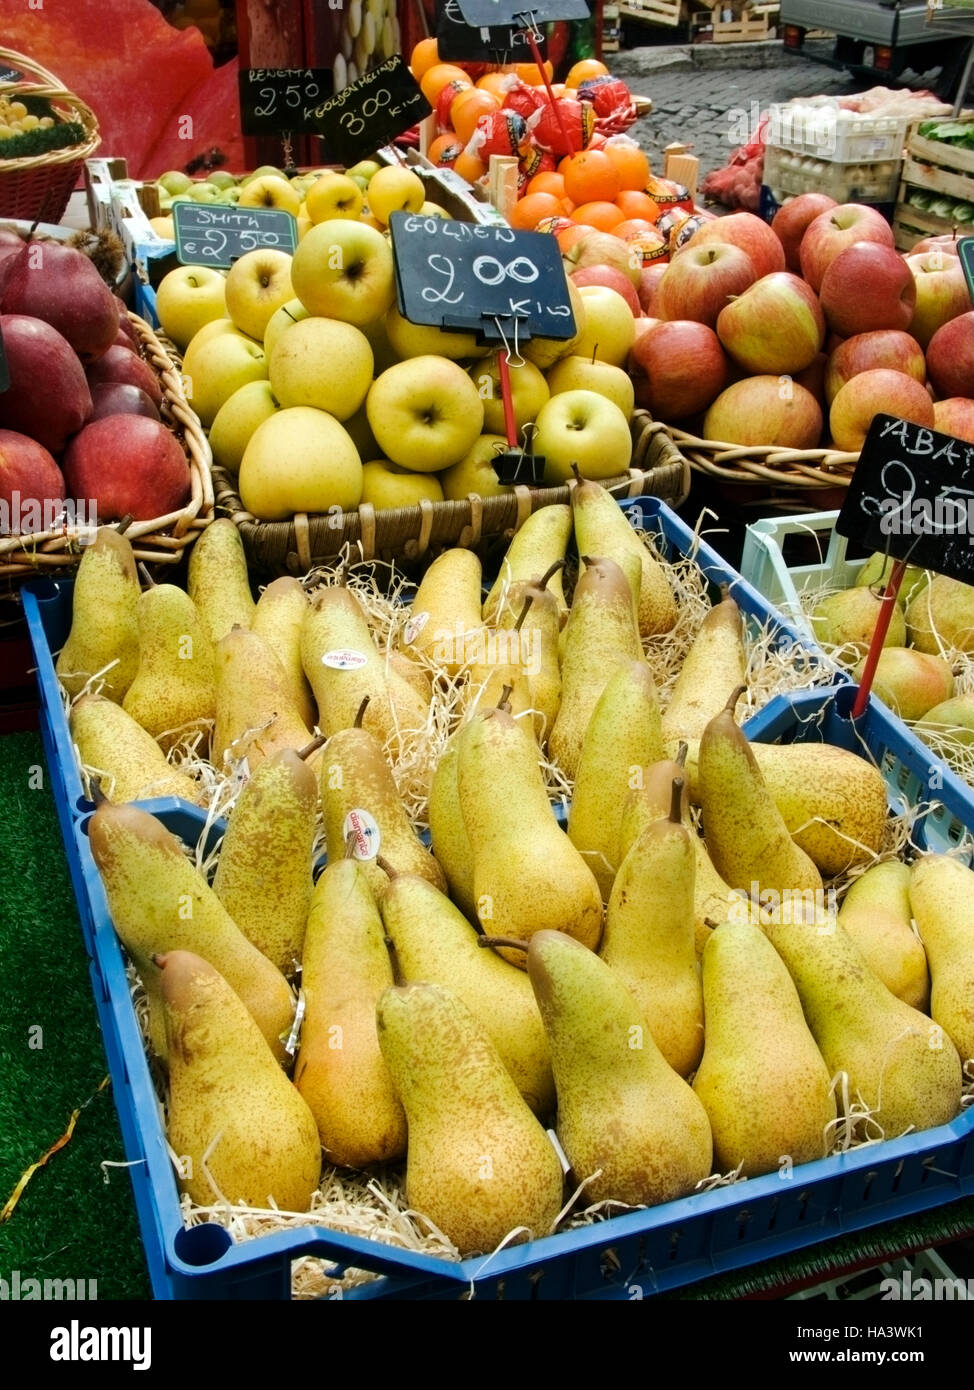 Pears in fruiterer market stall, market in Rome, Italy, Europe Stock Photo